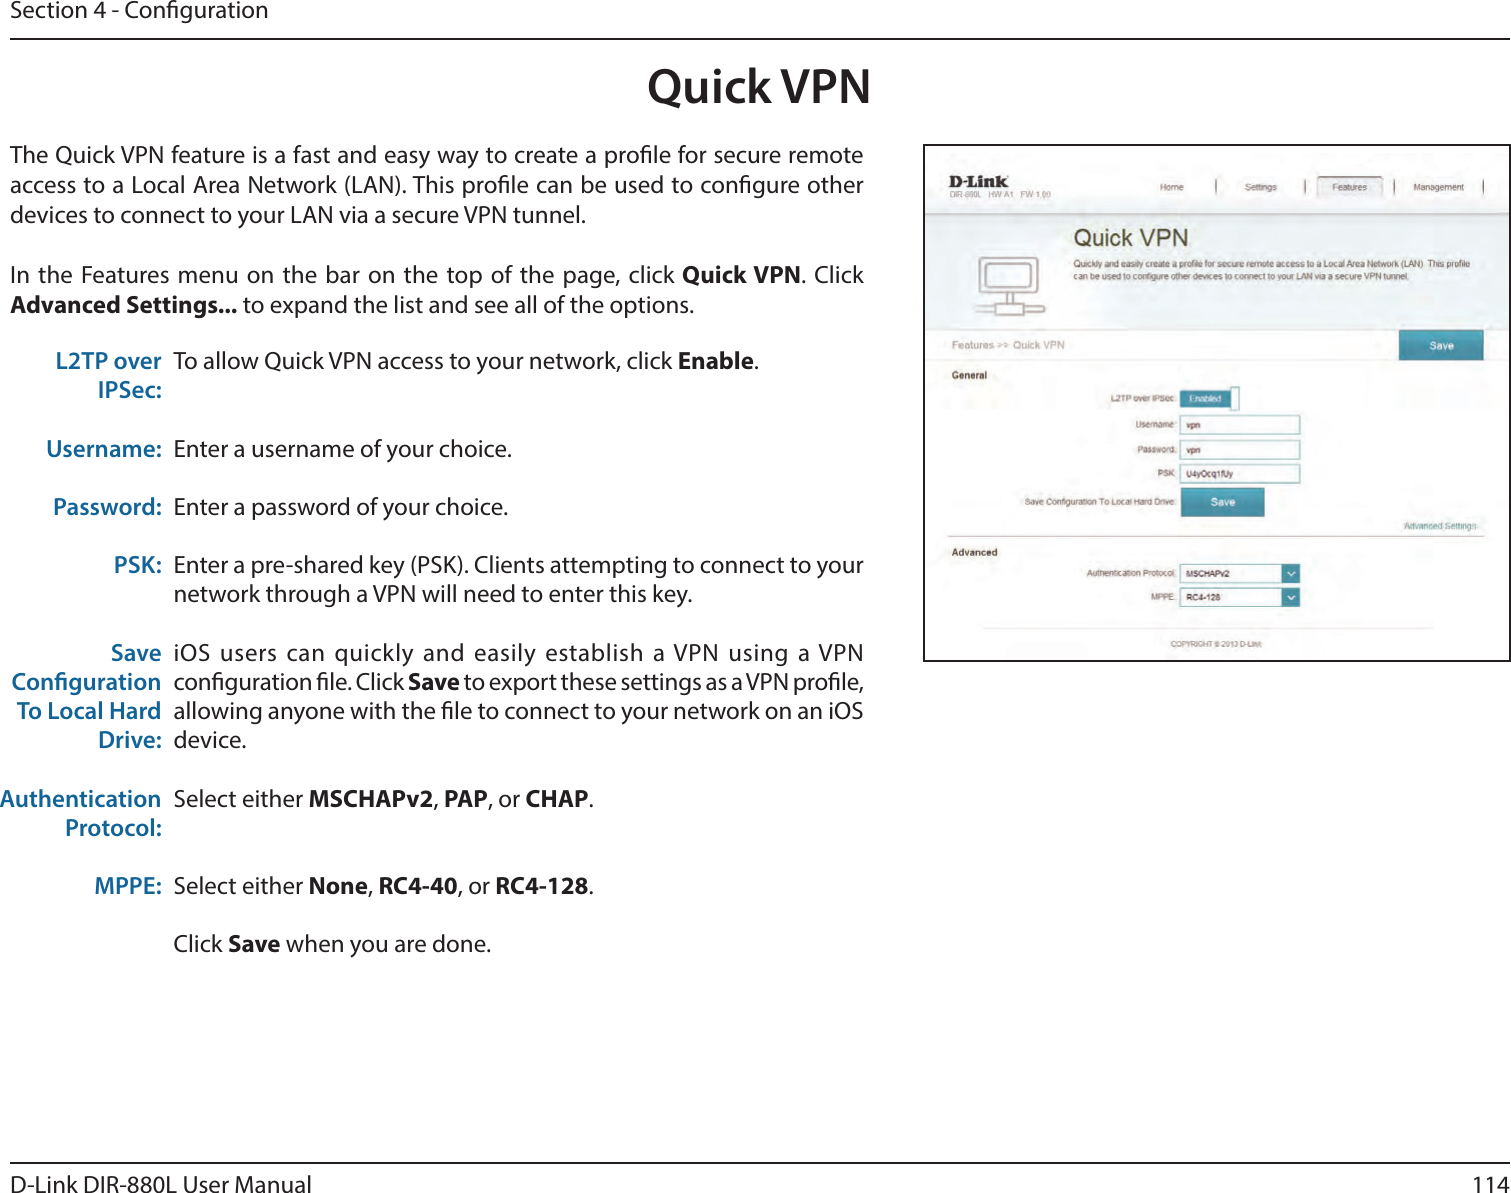 114D-Link DIR-880L User ManualSection 4 - CongurationQuick VPNThe Quick VPN feature is a fast and easy way to create a prole for secure remote access to a Local Area Network (LAN). This prole can be used to congure other devices to connect to your LAN via a secure VPN tunnel.In the Features menu on the bar on the top of the page, click Quick VPN. Click Advanced Settings... to expand the list and see all of the options. To allow Quick VPN access to your network, click Enable.Enter a username of your choice.Enter a password of your choice.Enter a pre-shared key (PSK). Clients attempting to connect to your network through a VPN will need to enter this key.iOS  users  can quickly and  easily  establish  a VPN  using  a VPN conguration le. Click Save to export these settings as a VPN prole, allowing anyone with the le to connect to your network on an iOS device.Select either MSCHAPv2, PAP, or CHAP.Select either None, RC4-40, or RC4-128.Click Save when you are done.L2TP over IPSec:Username:Password:PSK:Save Conguration To Local Hard Drive:Authentication Protocol:MPPE: